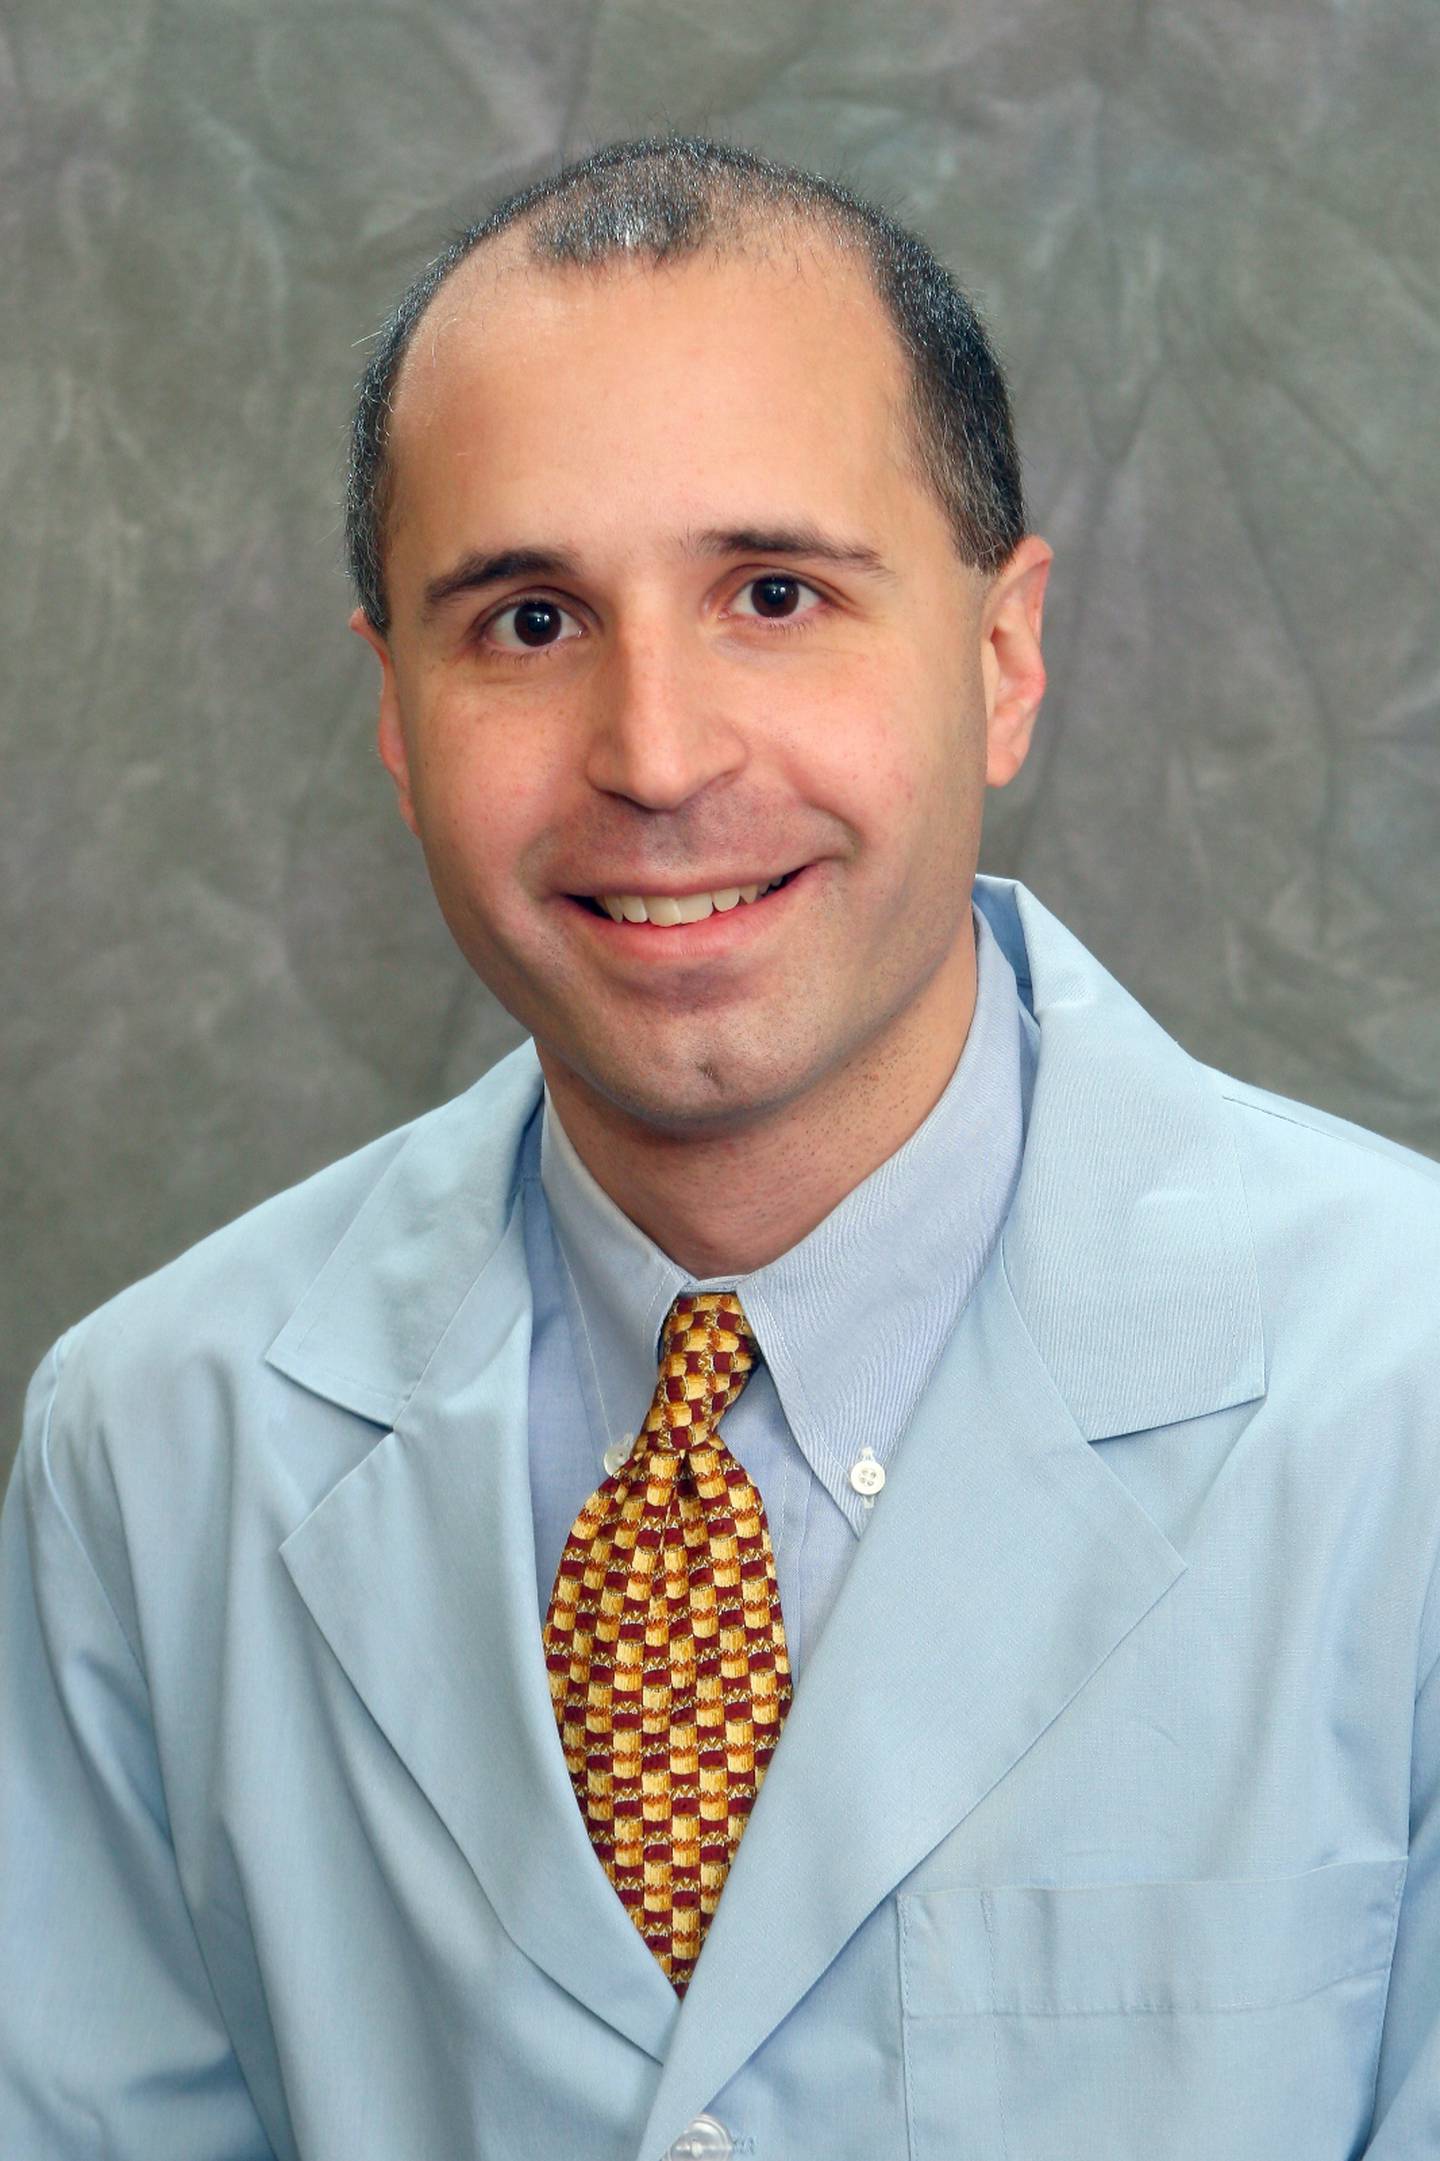 Dr. Paul Aschinberg is a Joliet pediatrician who also sees patients at Silver Cross Hospital in New Lenox.